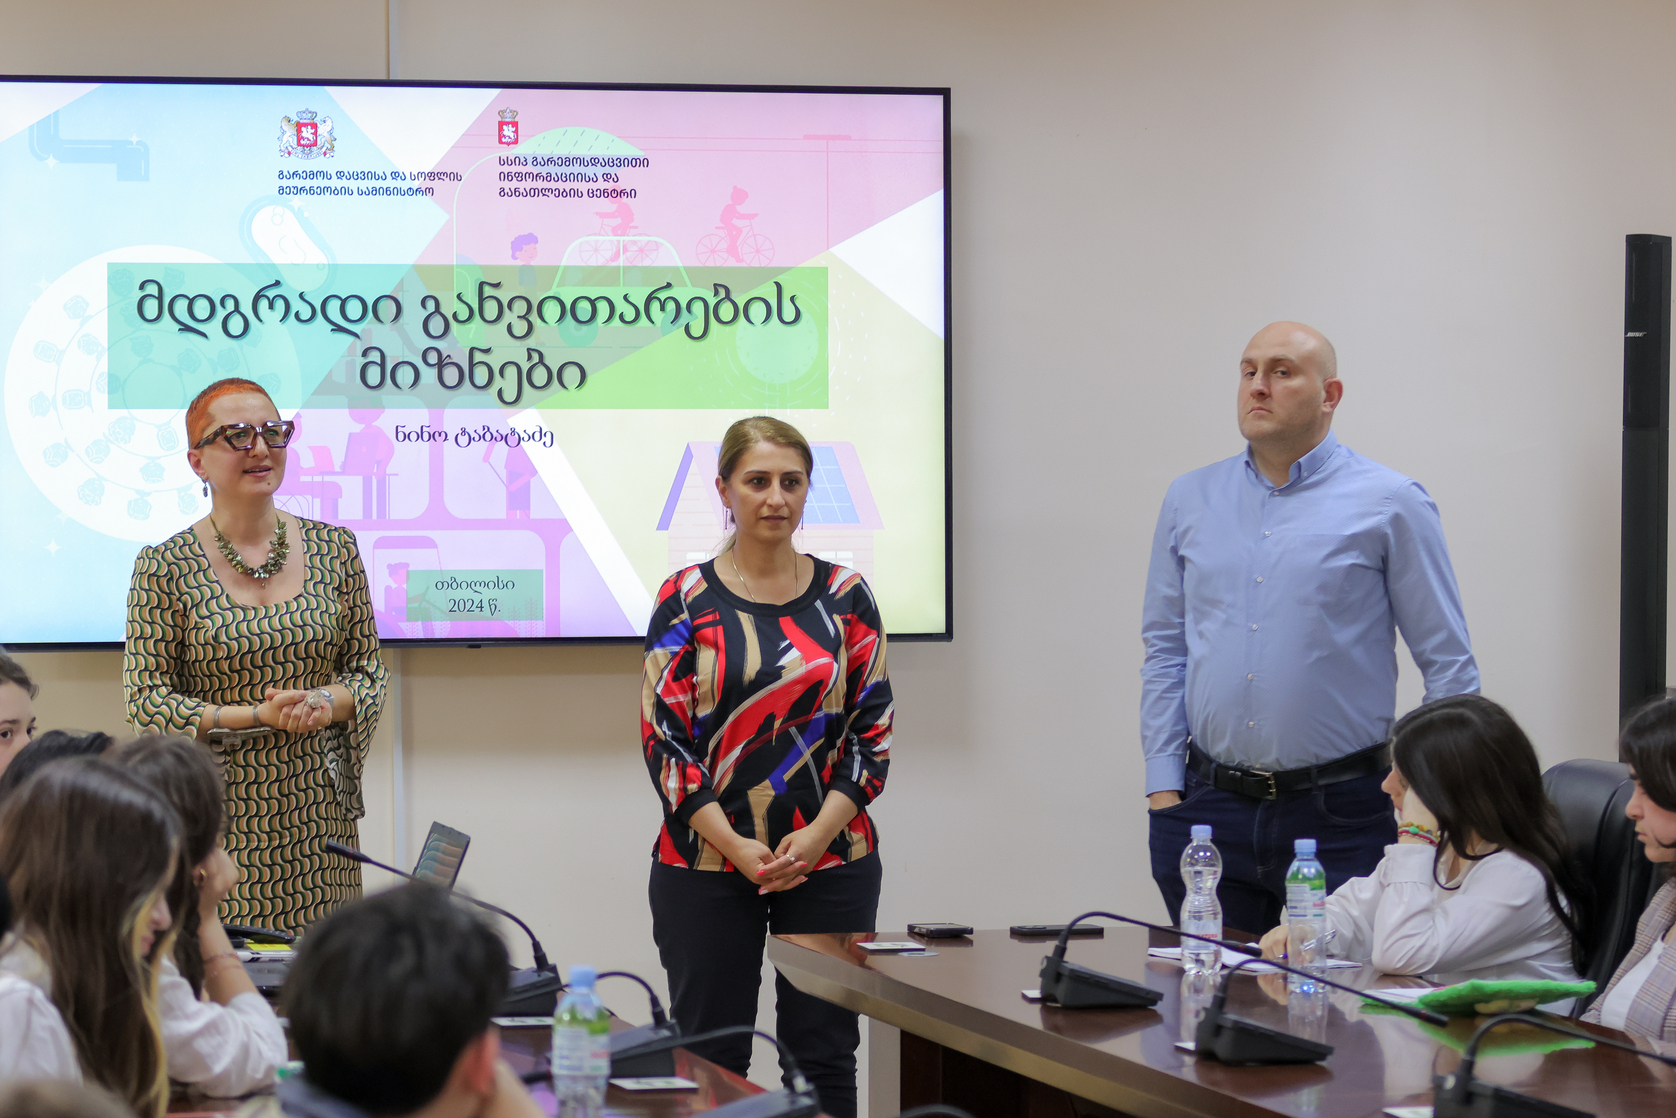 An open lecture as part of the "Debates for Better Education" project took place at the EIEC